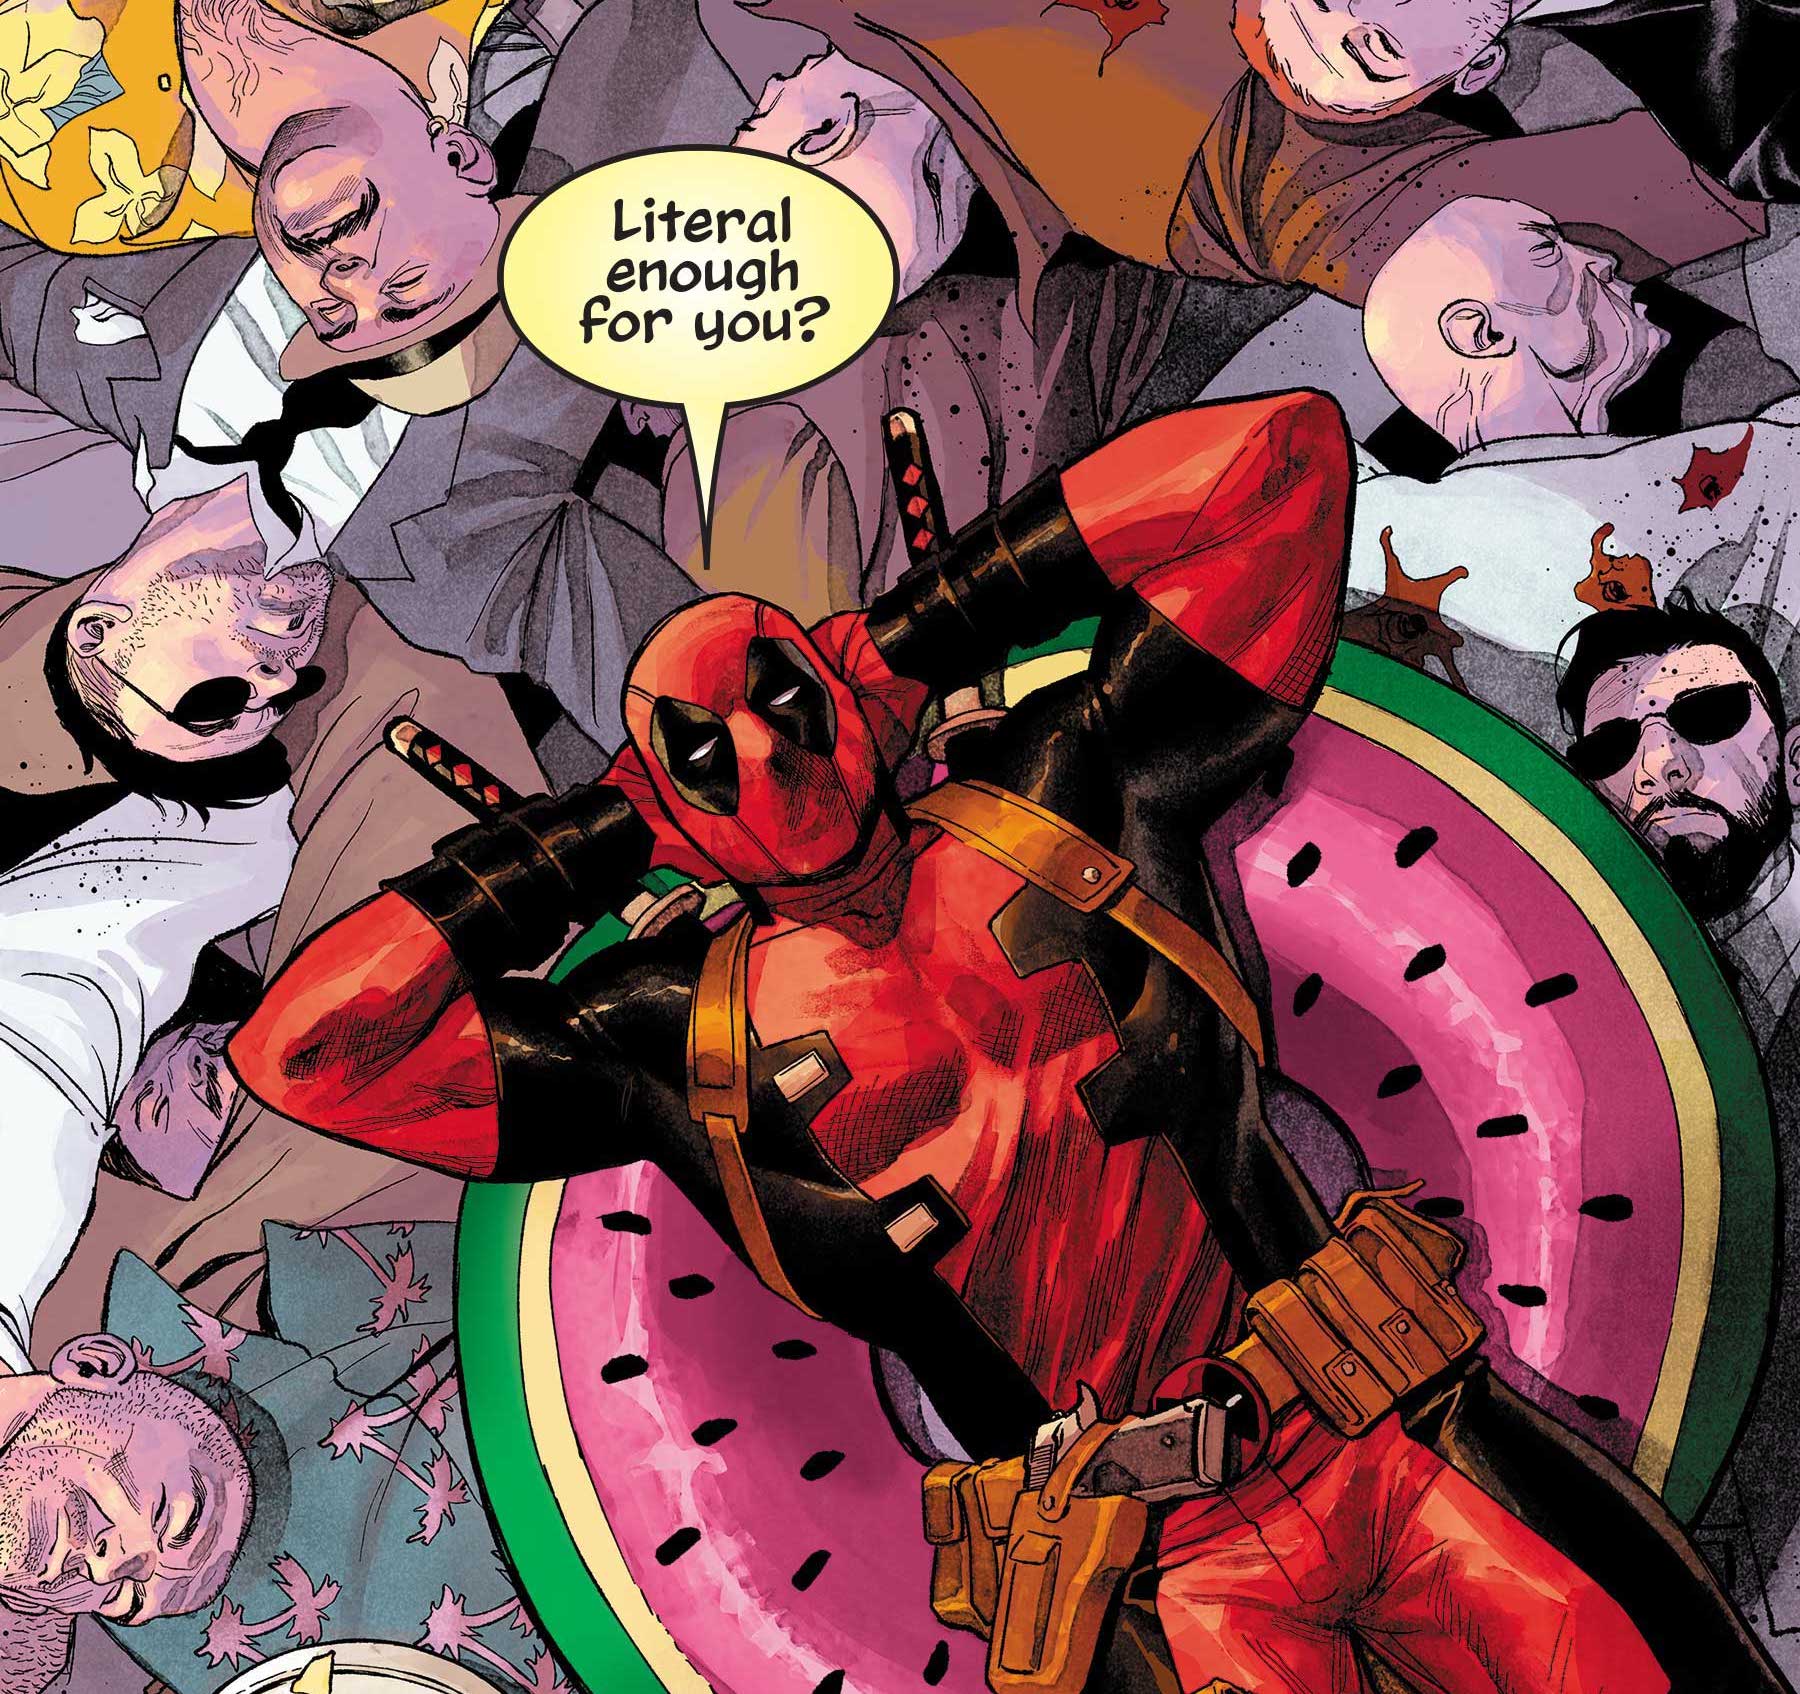 'Deadpool' #1 ongoing series announced by Alyssa Wong and Martin Coccolo